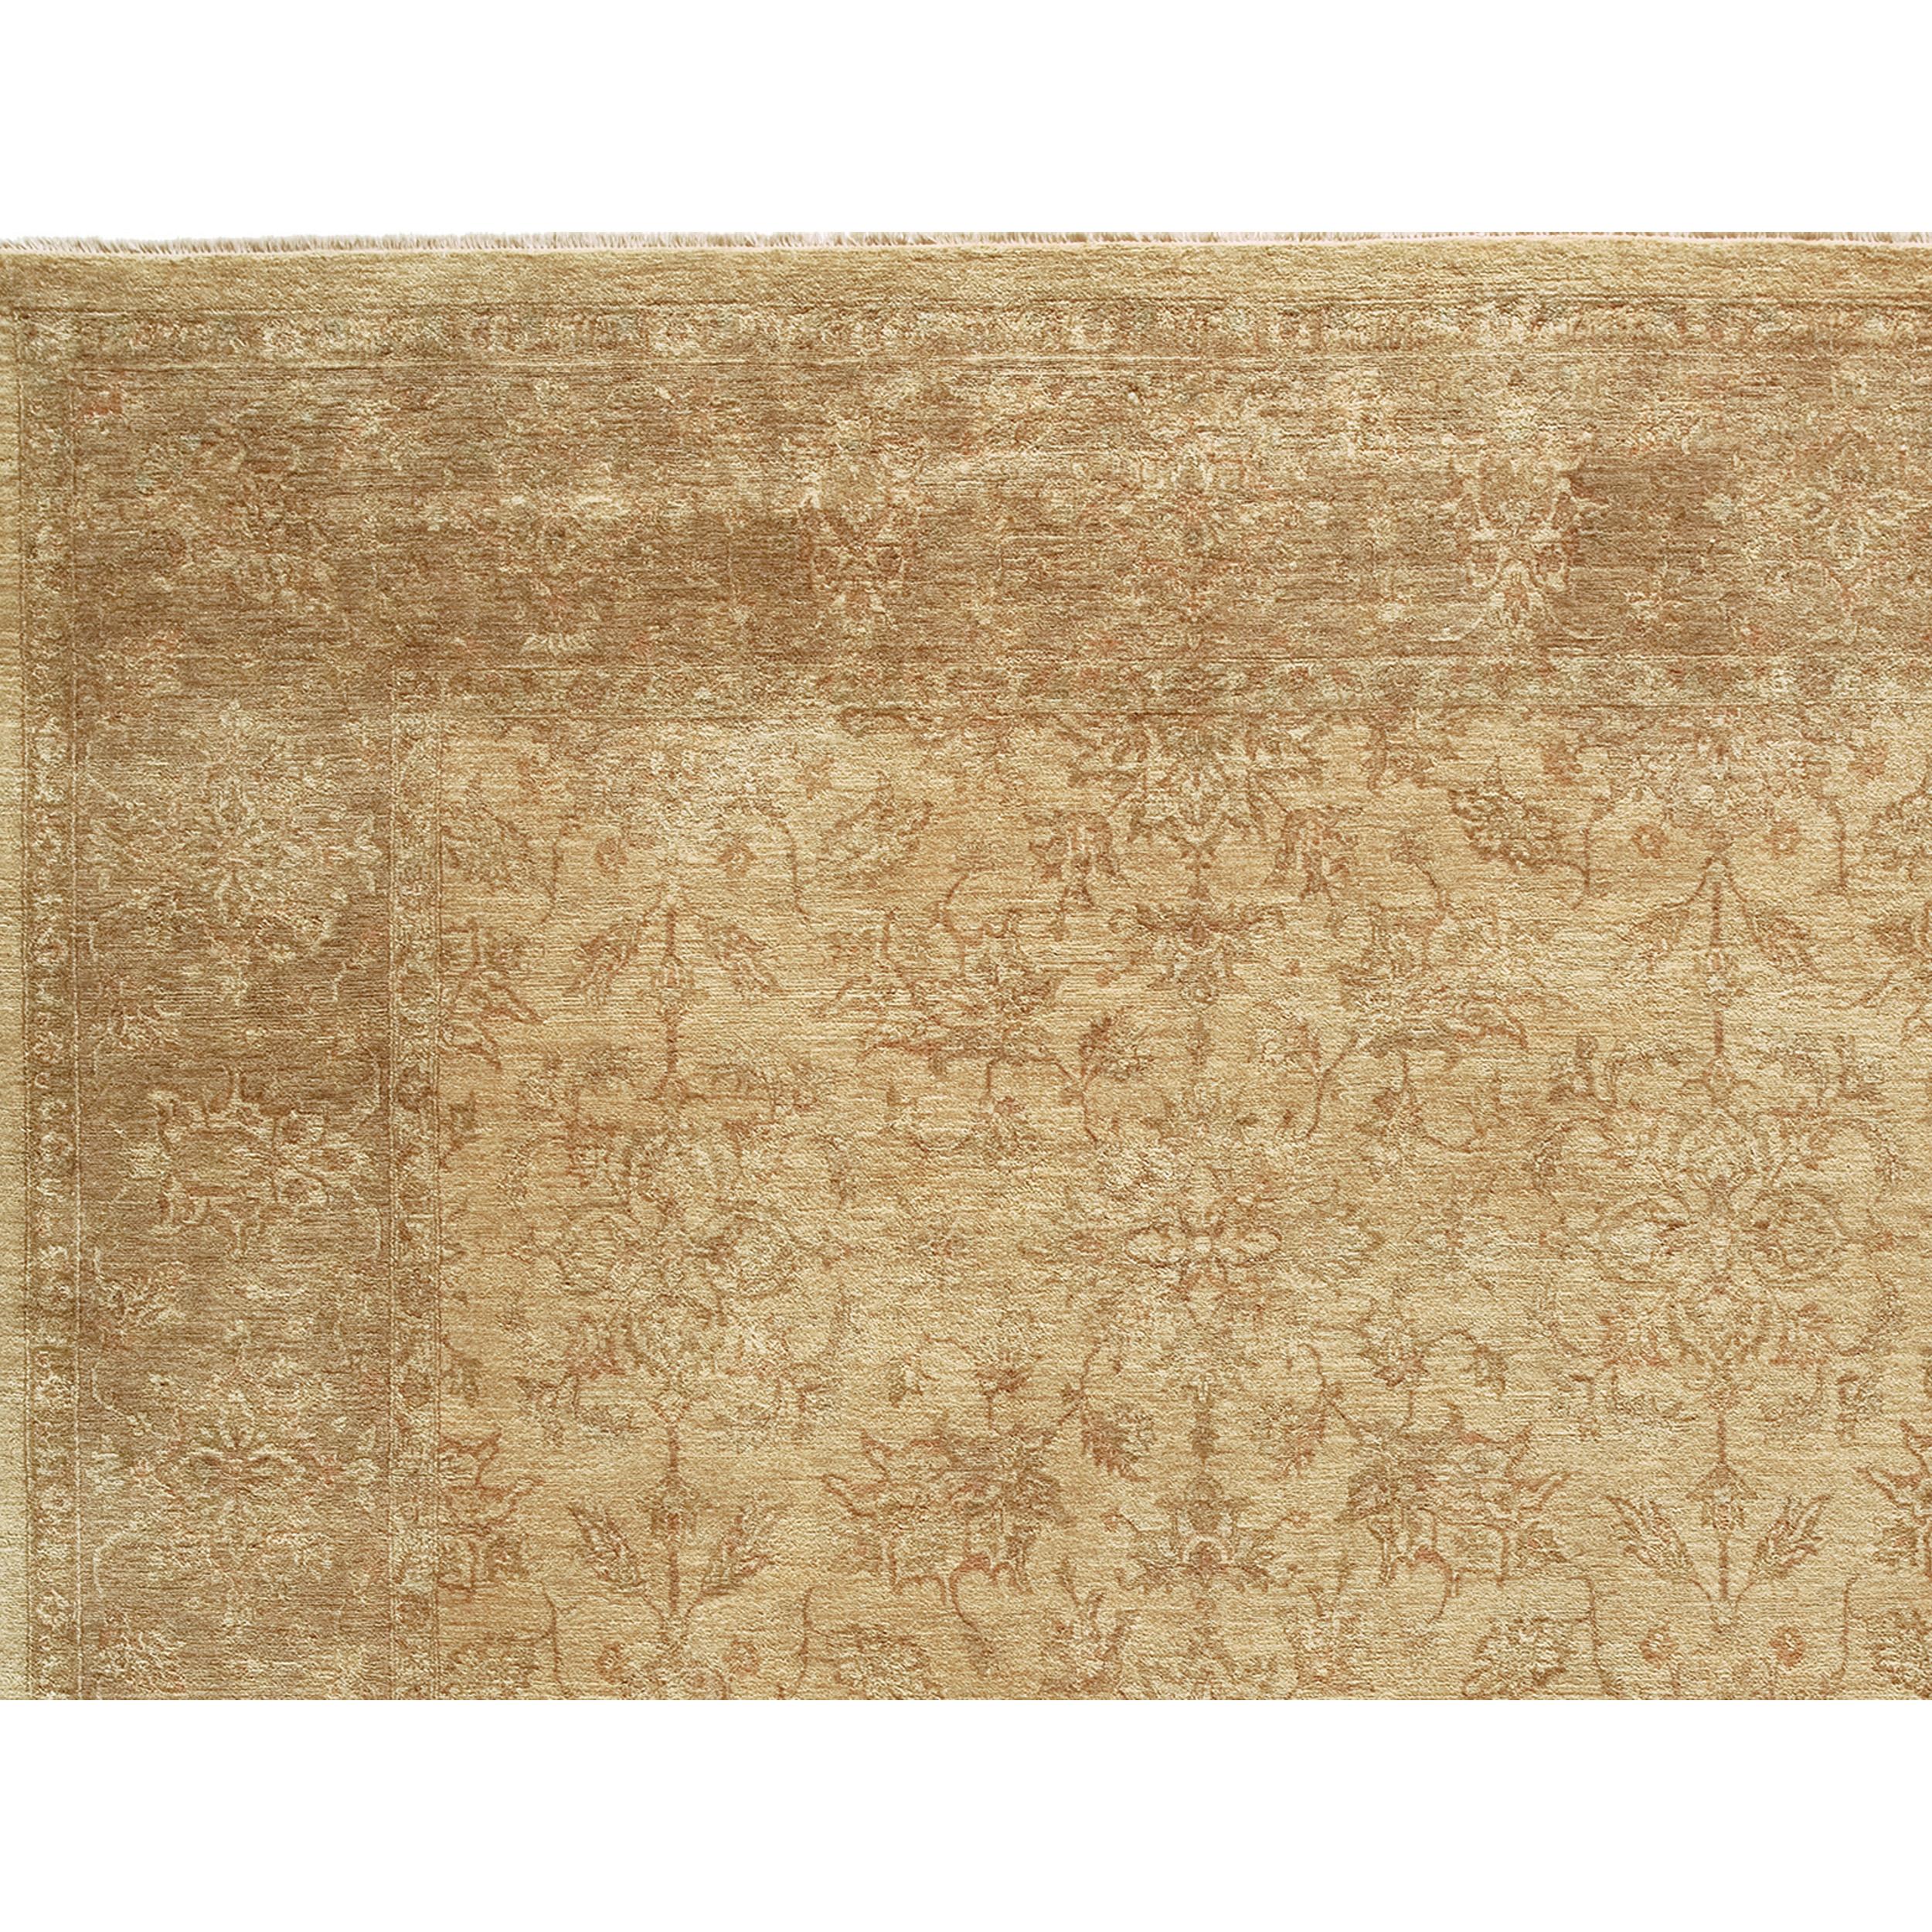 Luxury Traditional Hand-Knotted Doroksh Cream and Gold 12x18 Rug In New Condition For Sale In Secaucus, NJ